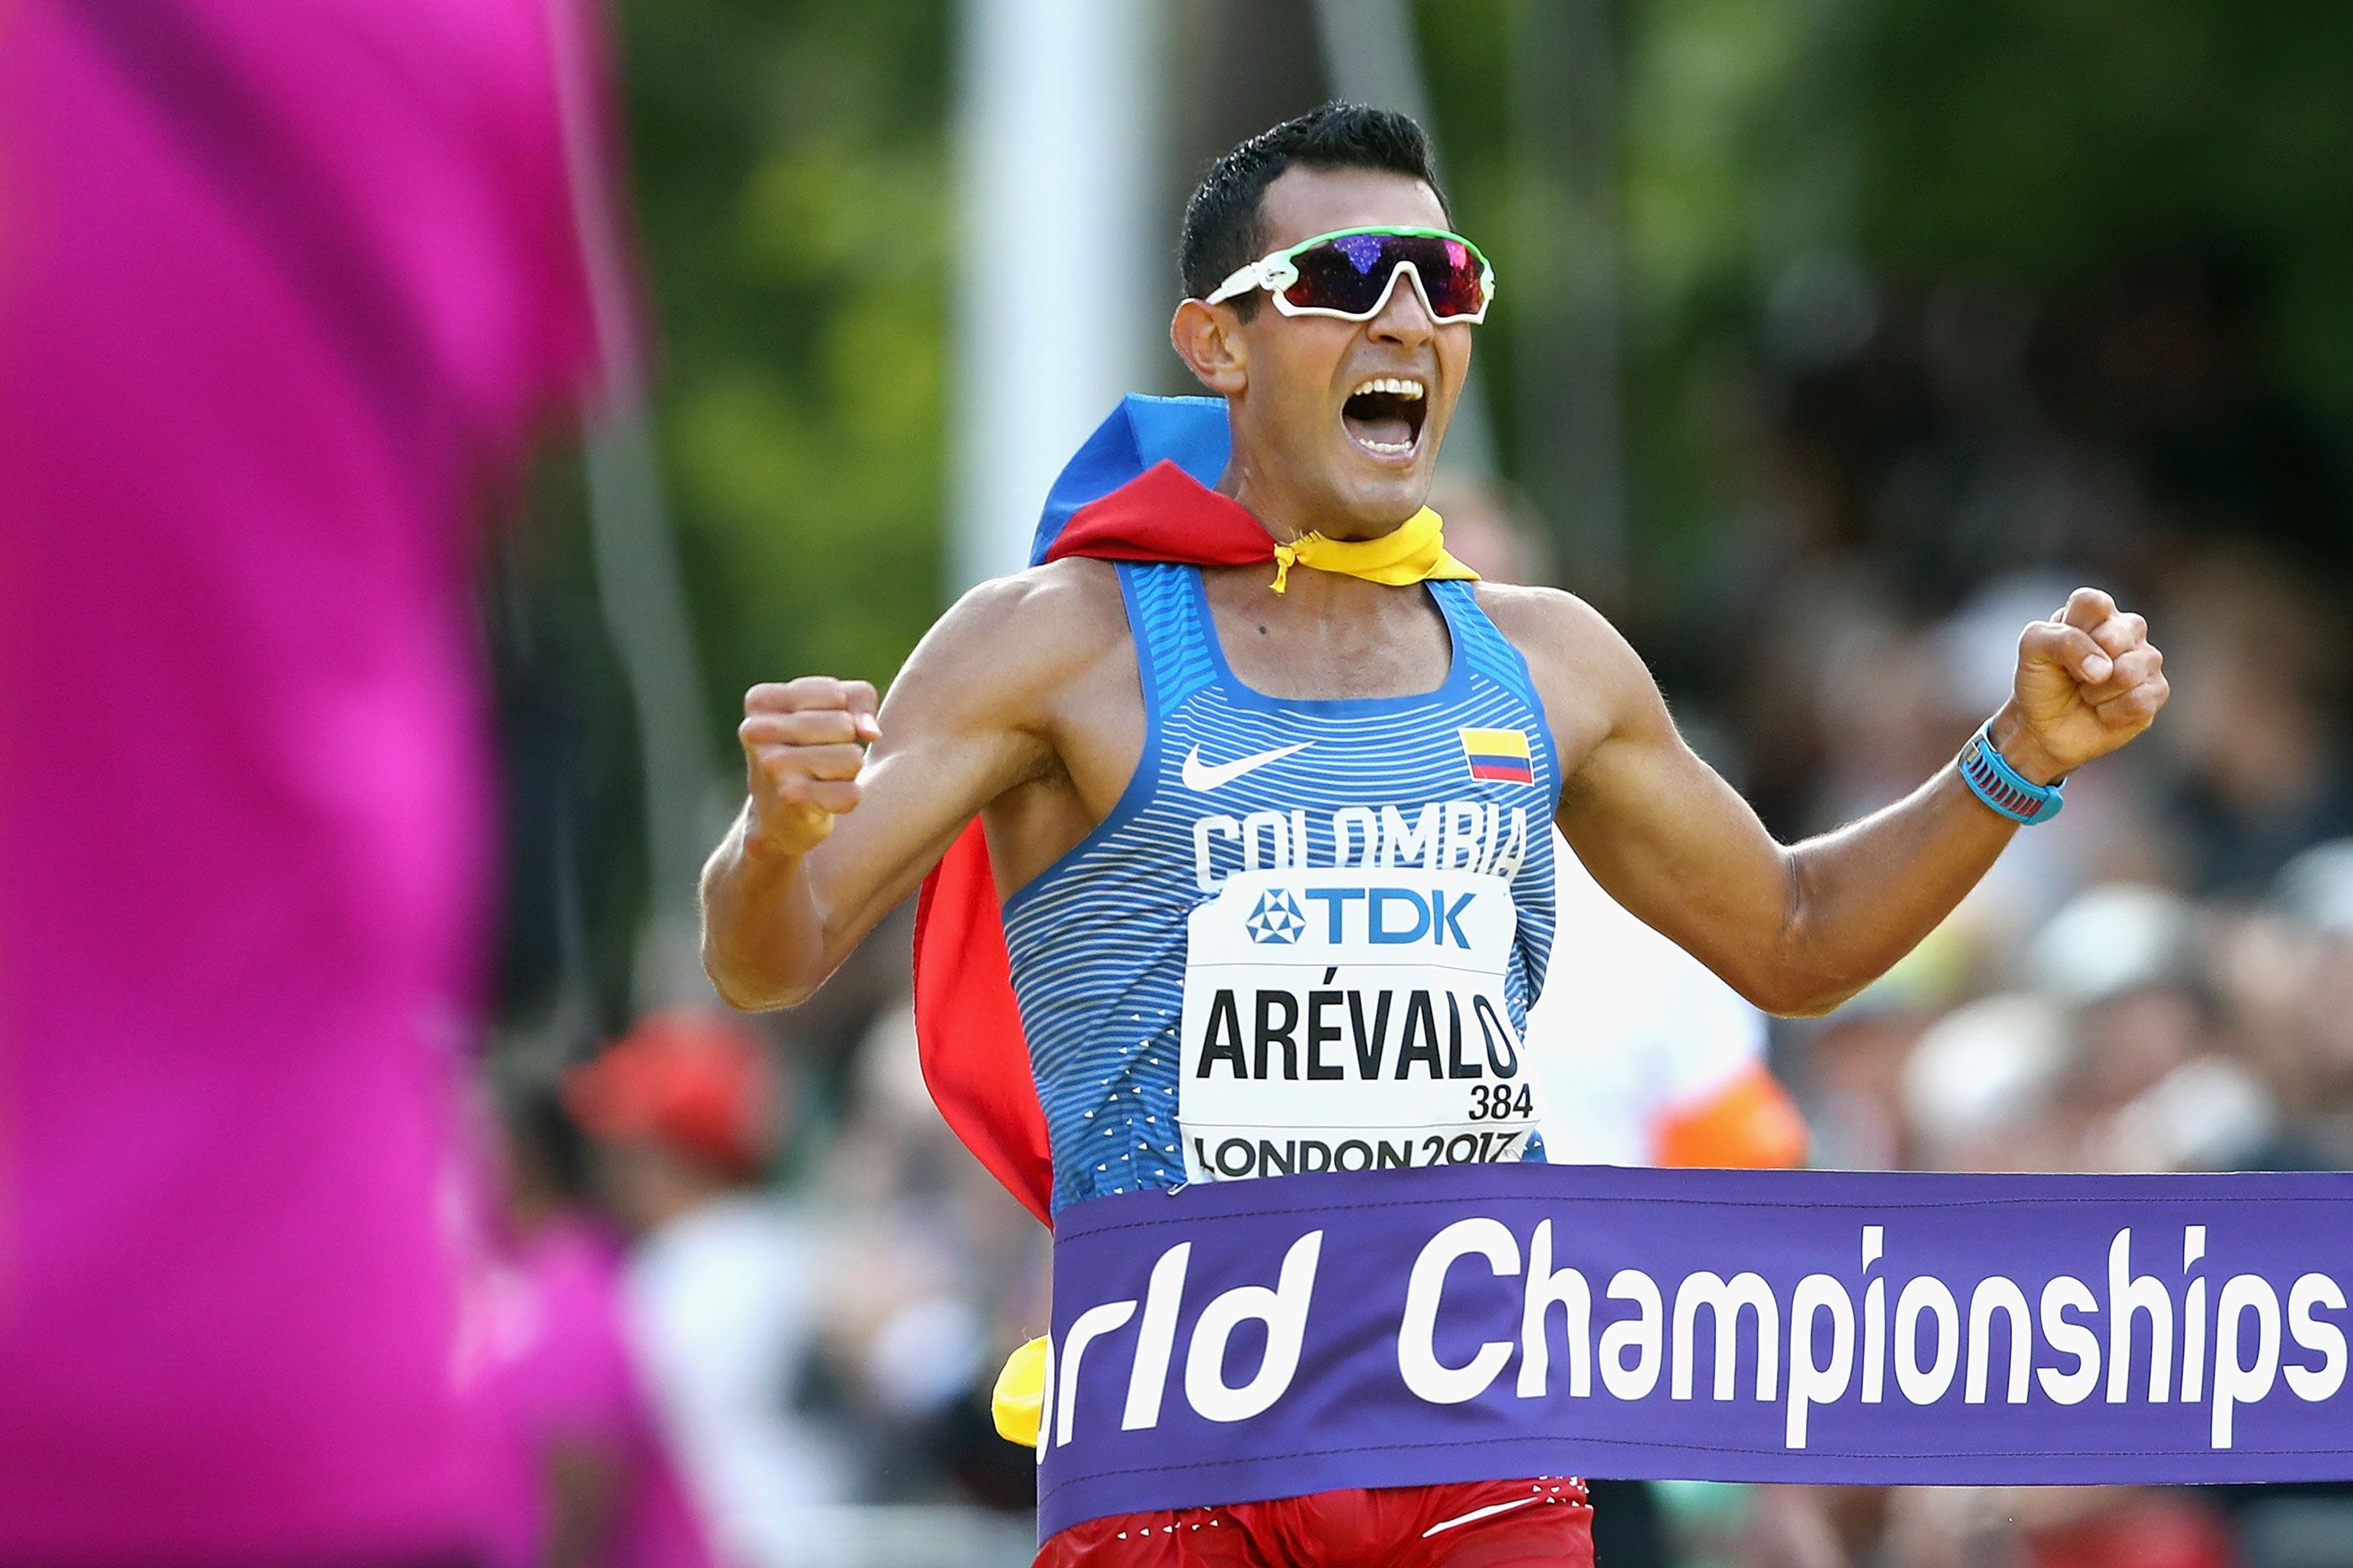 Eider Arevalo wins the 20km race walk at the 2017 World Athletics Championships in London